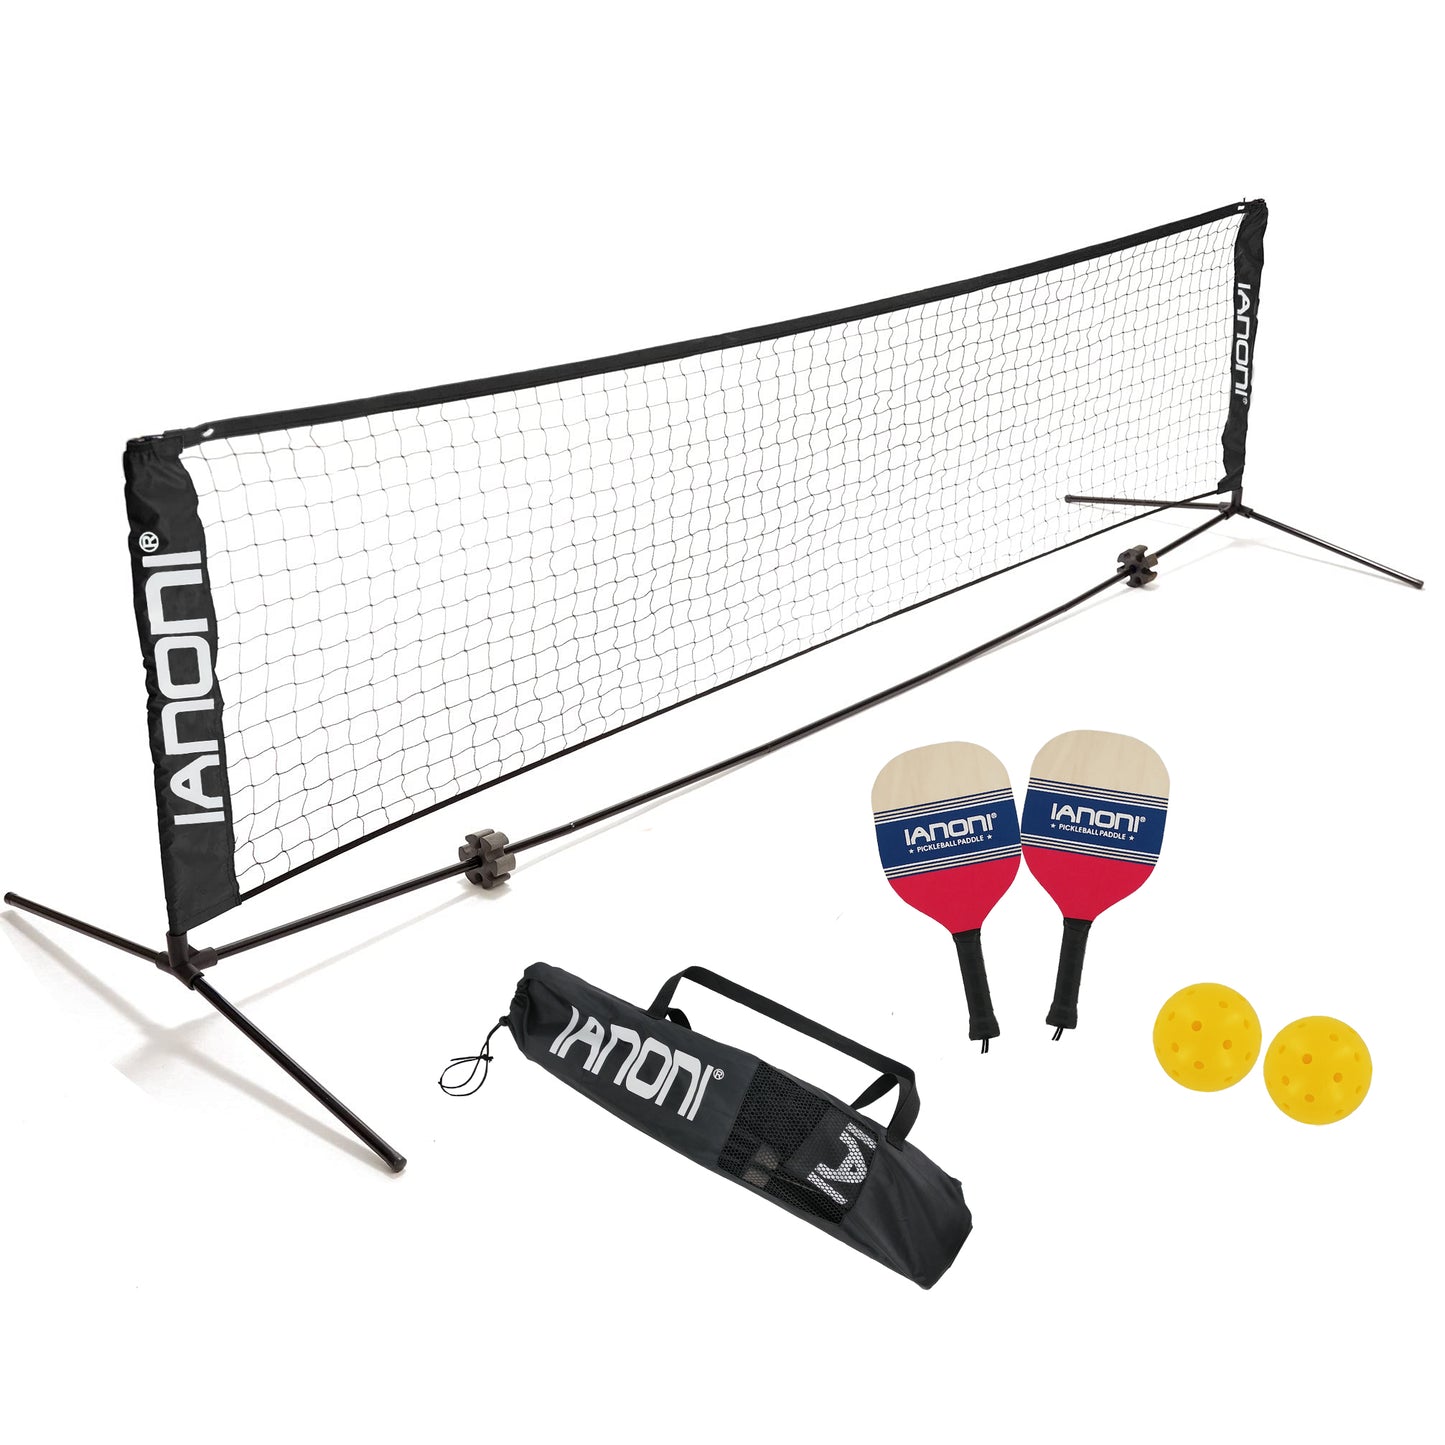 IANONI Games Portable Pickleball Net Set with 2 Wood Racket Paddles, 2 Outdoor Pickleballs, 10 FT Pickleball Net and Carry Bag